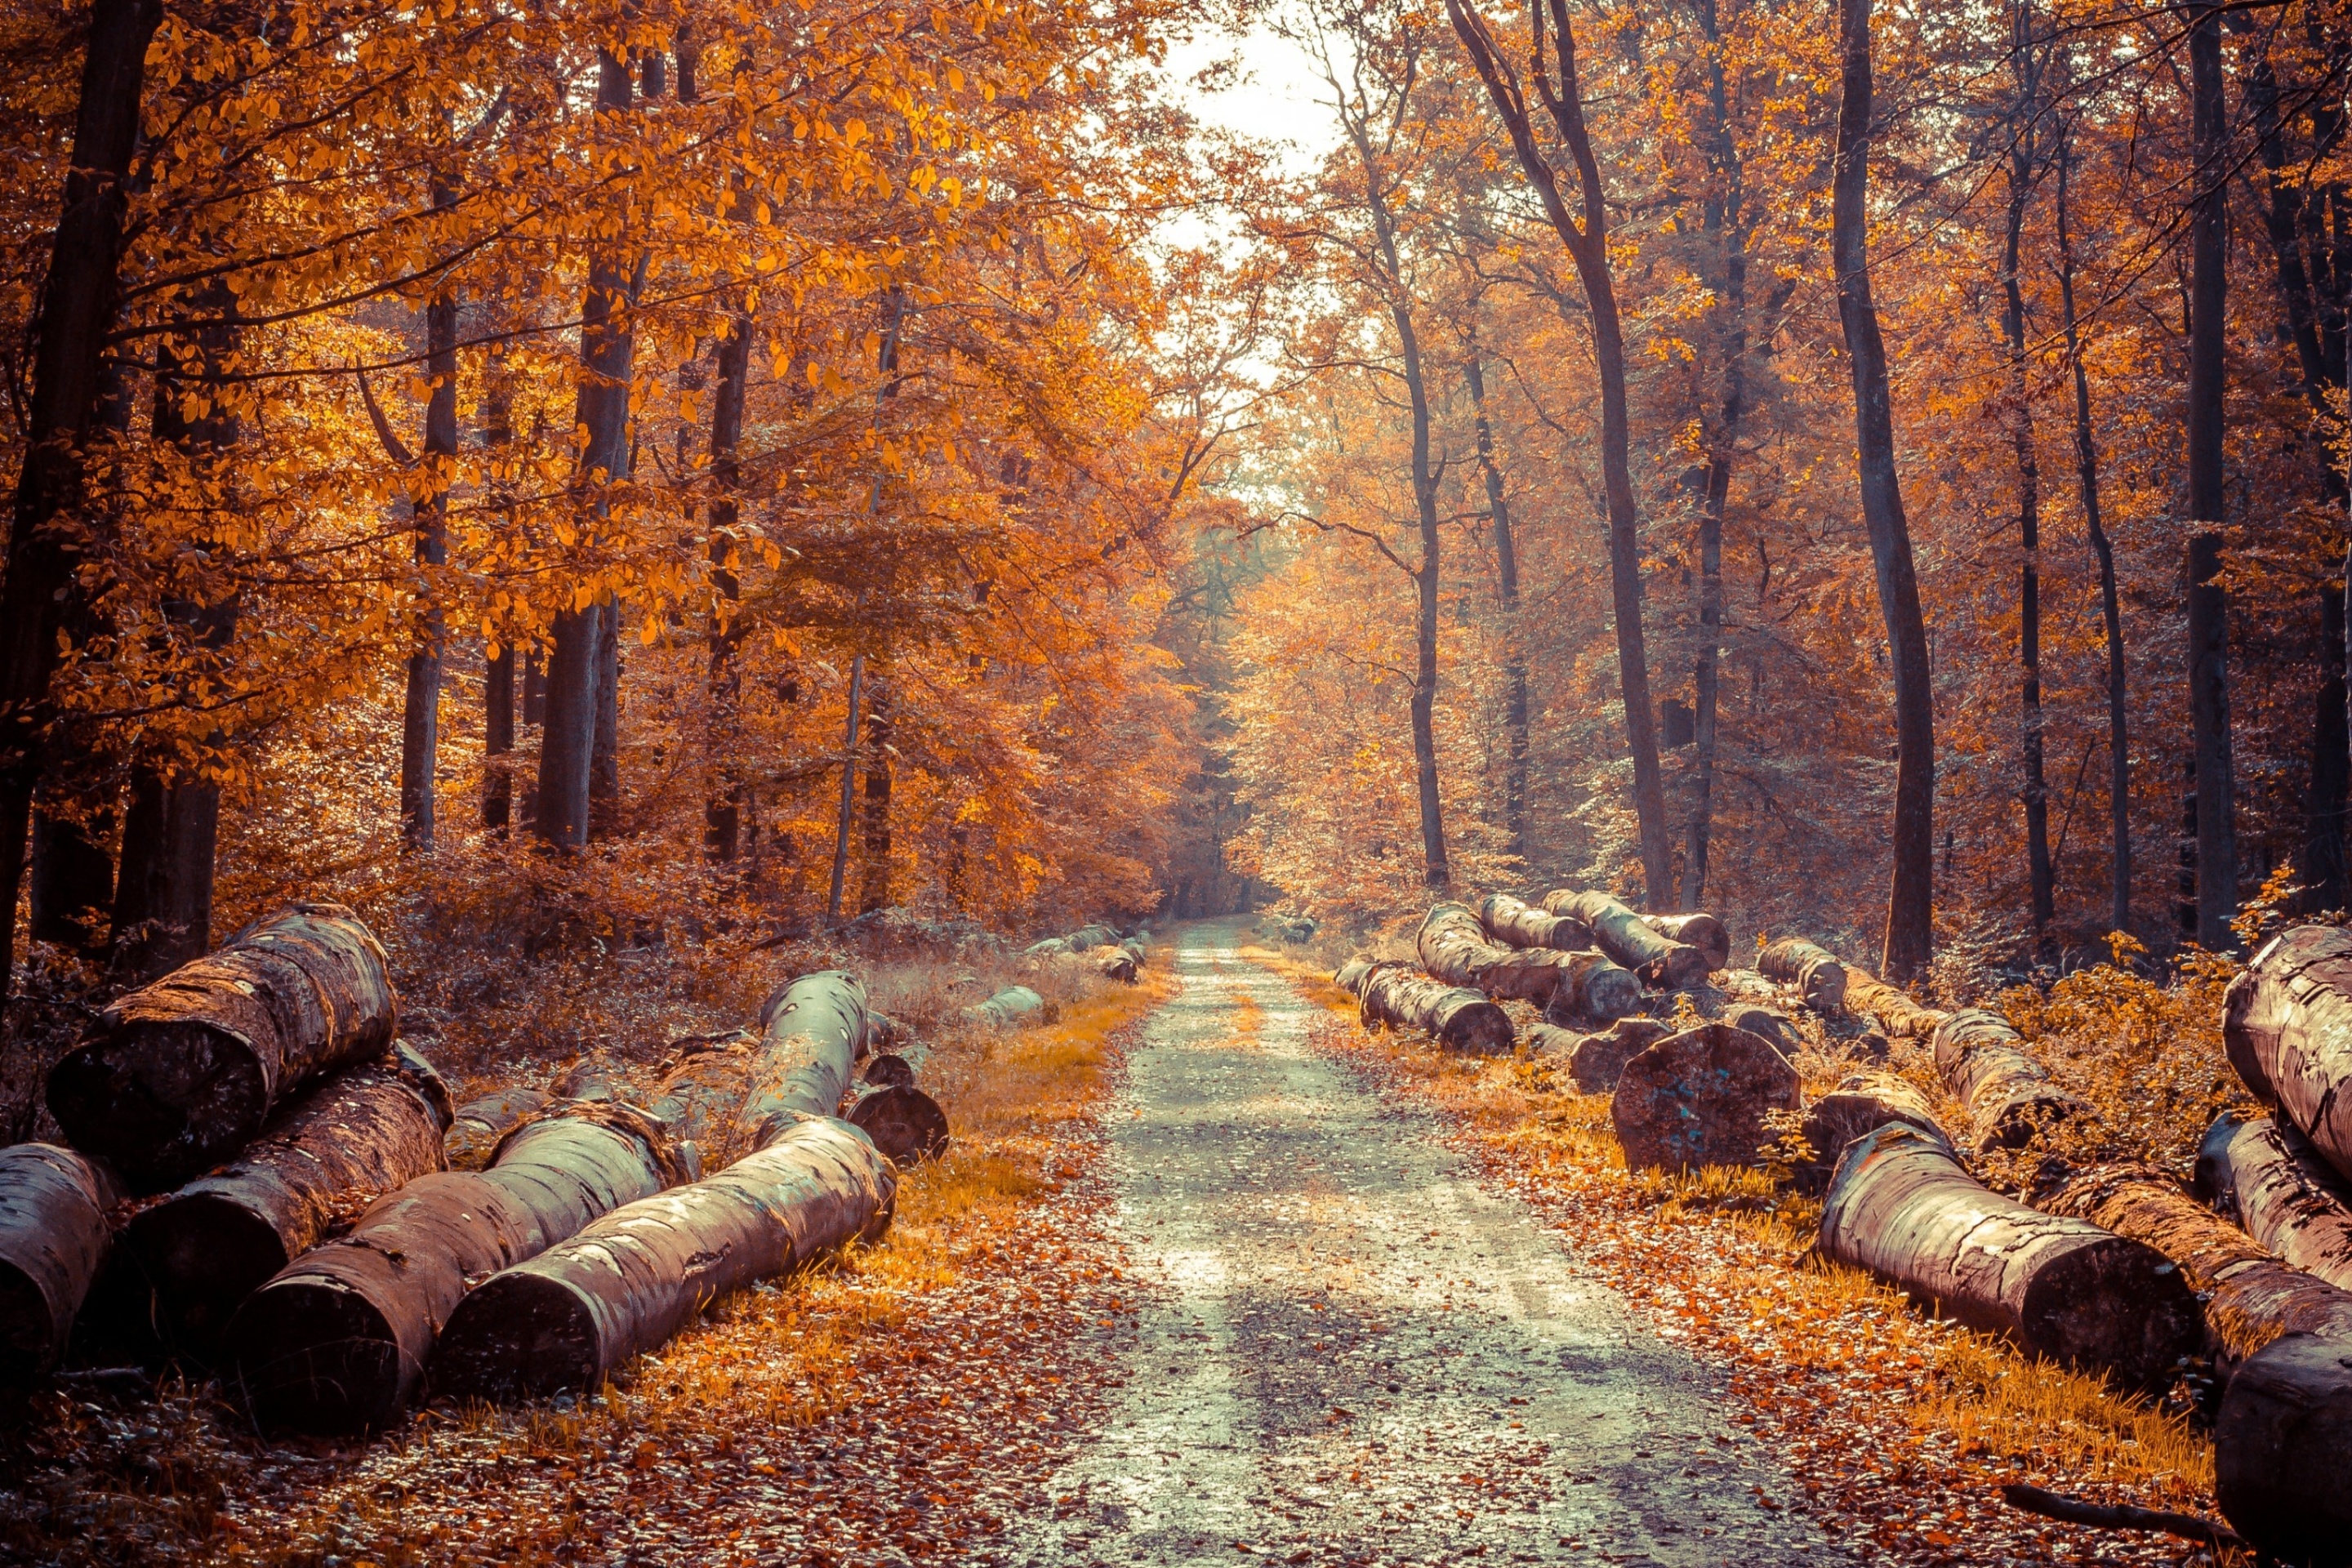 Road in the wild autumn forest wallpaper 2880x1920